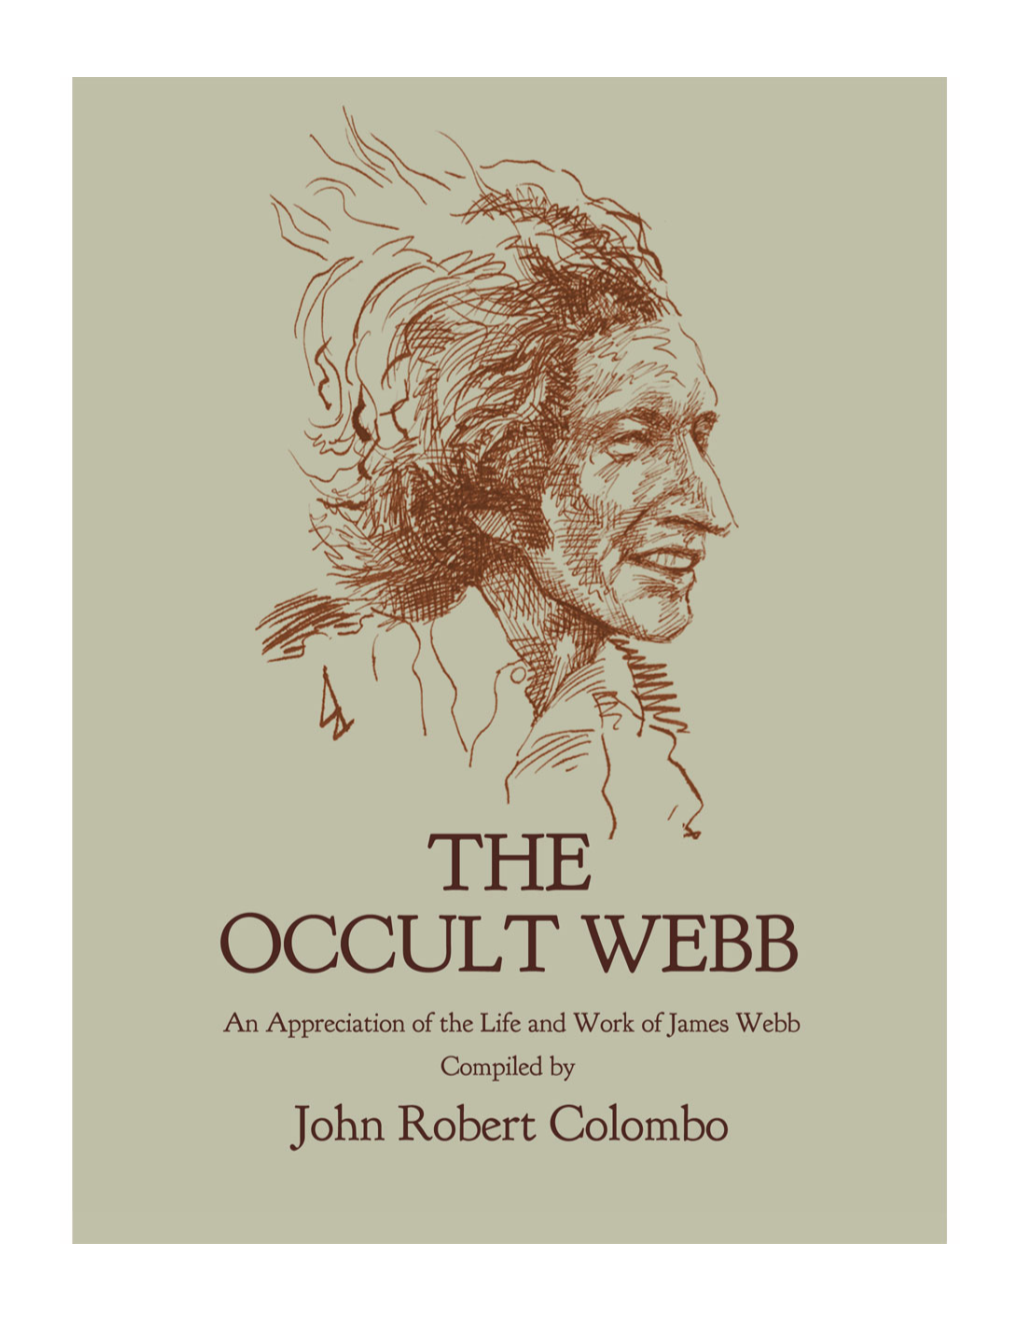 The Occult Webb